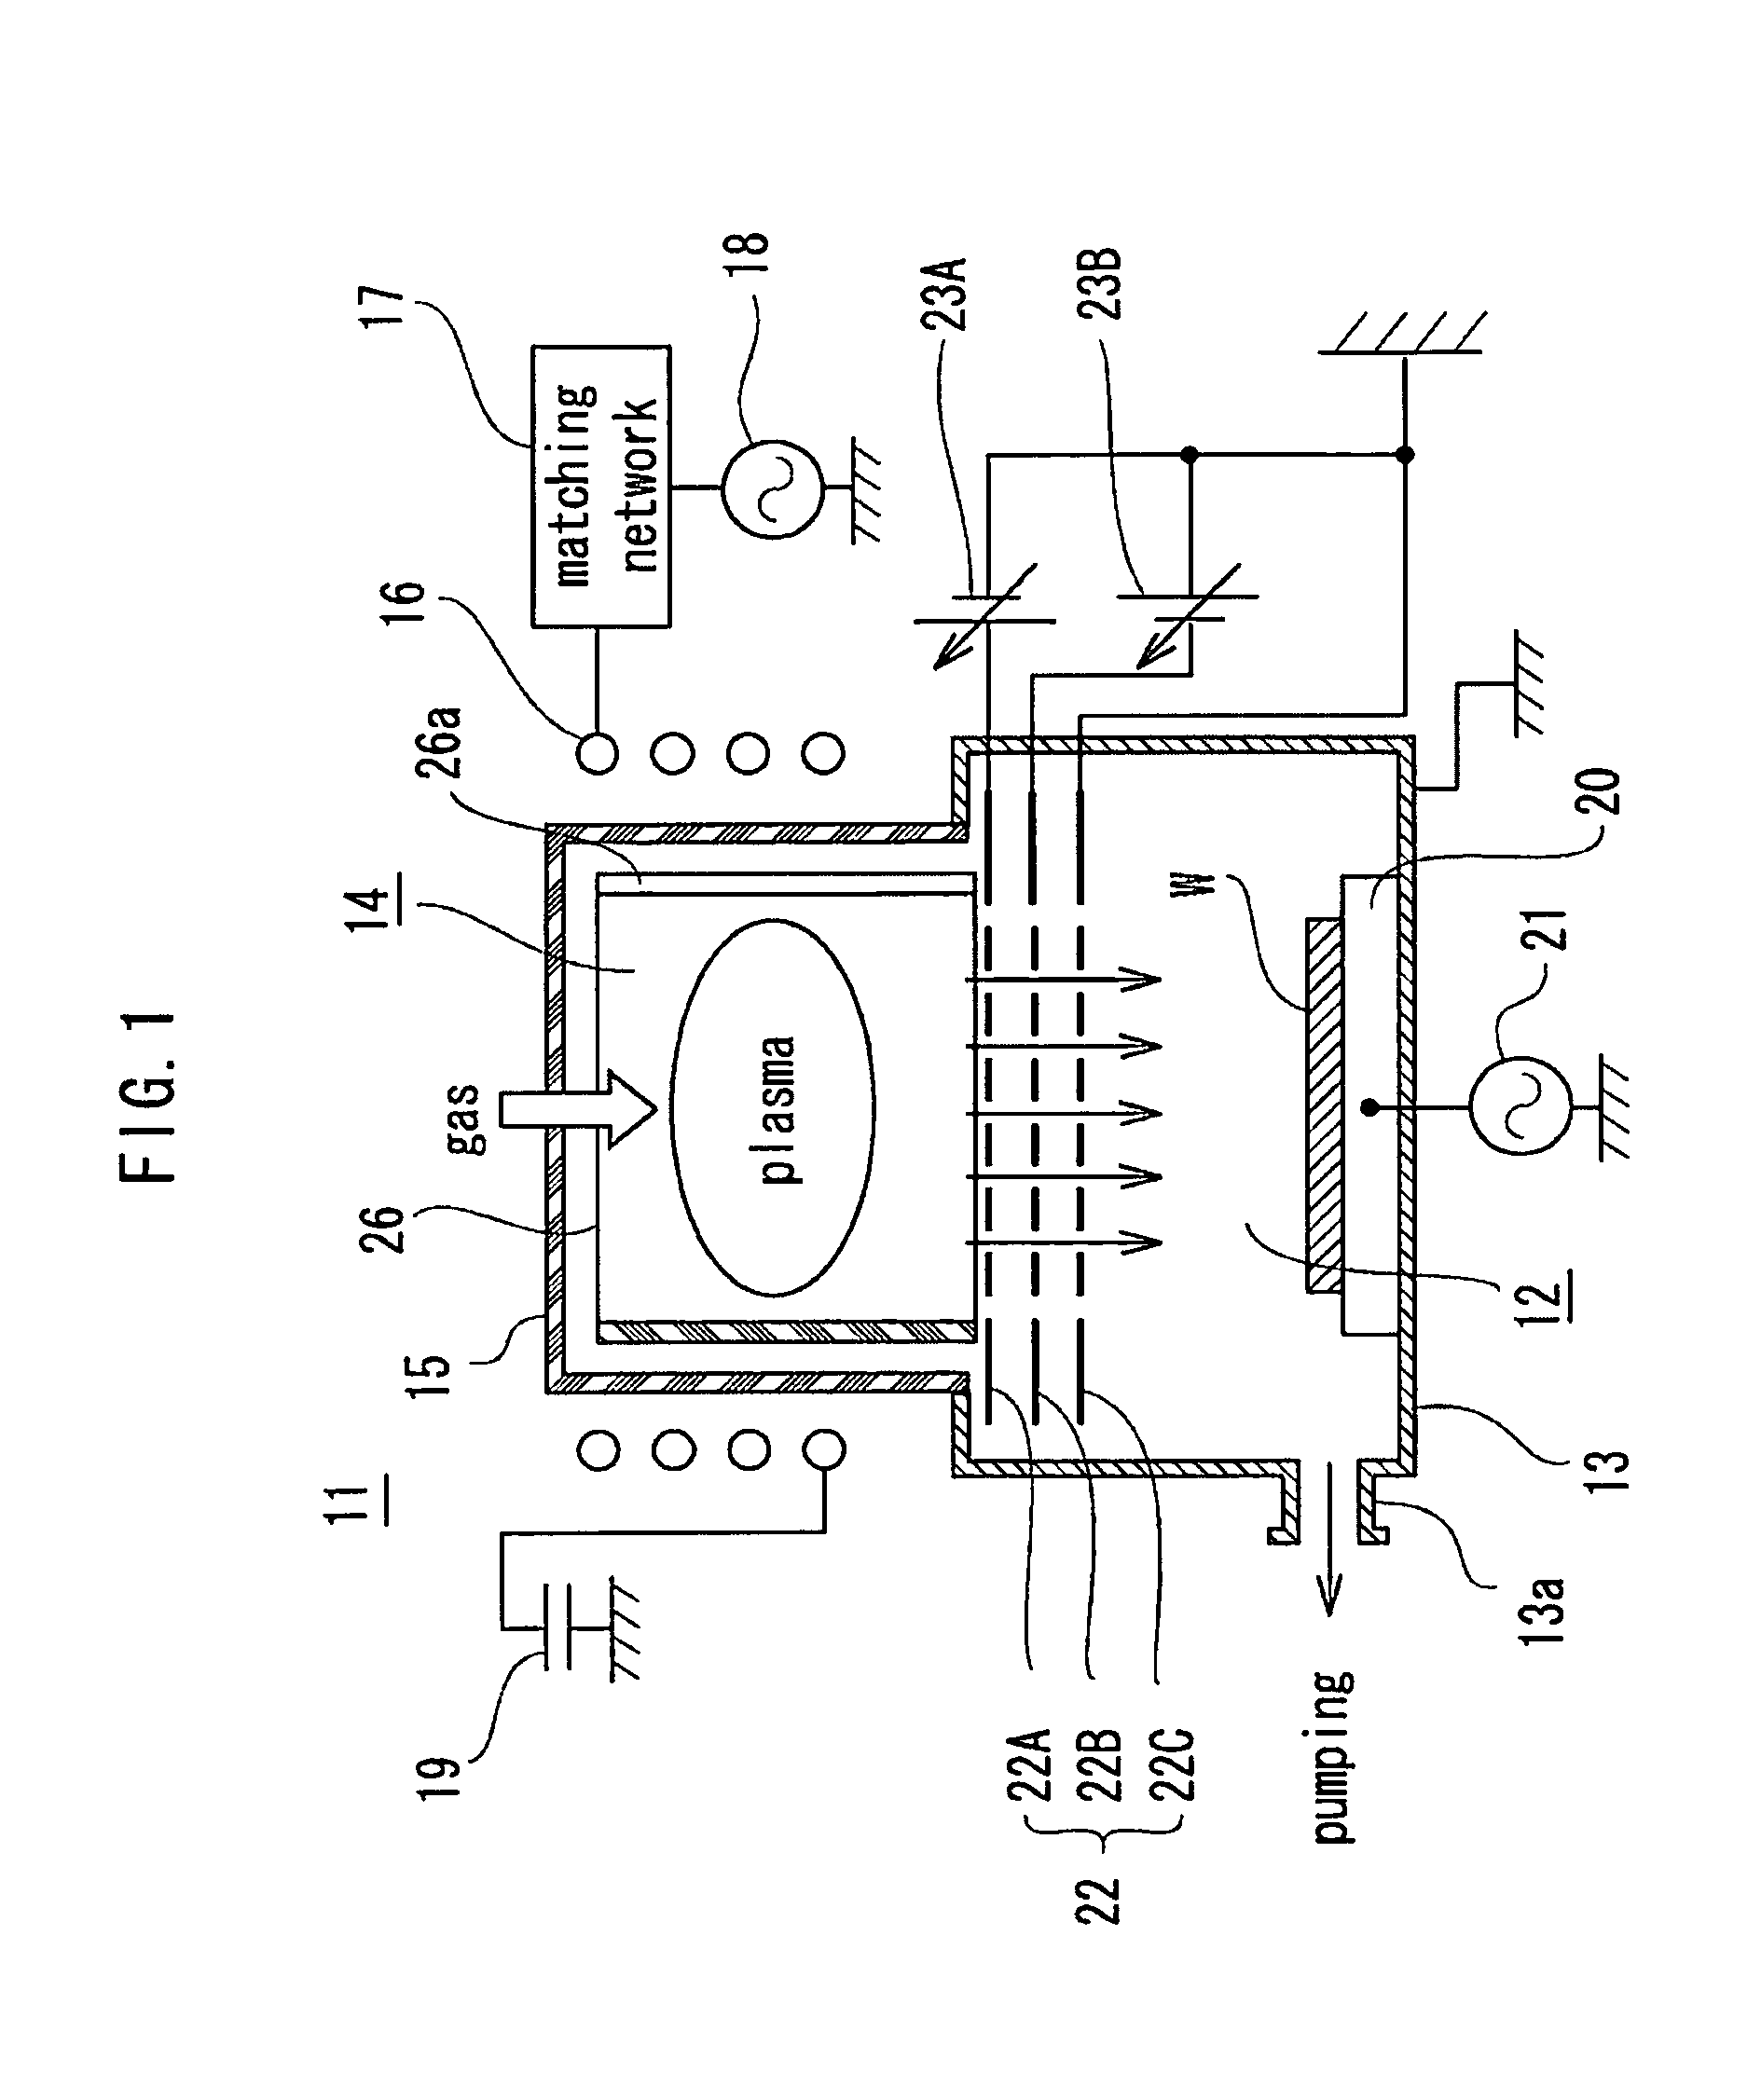 Ion source and plasma processing apparatus